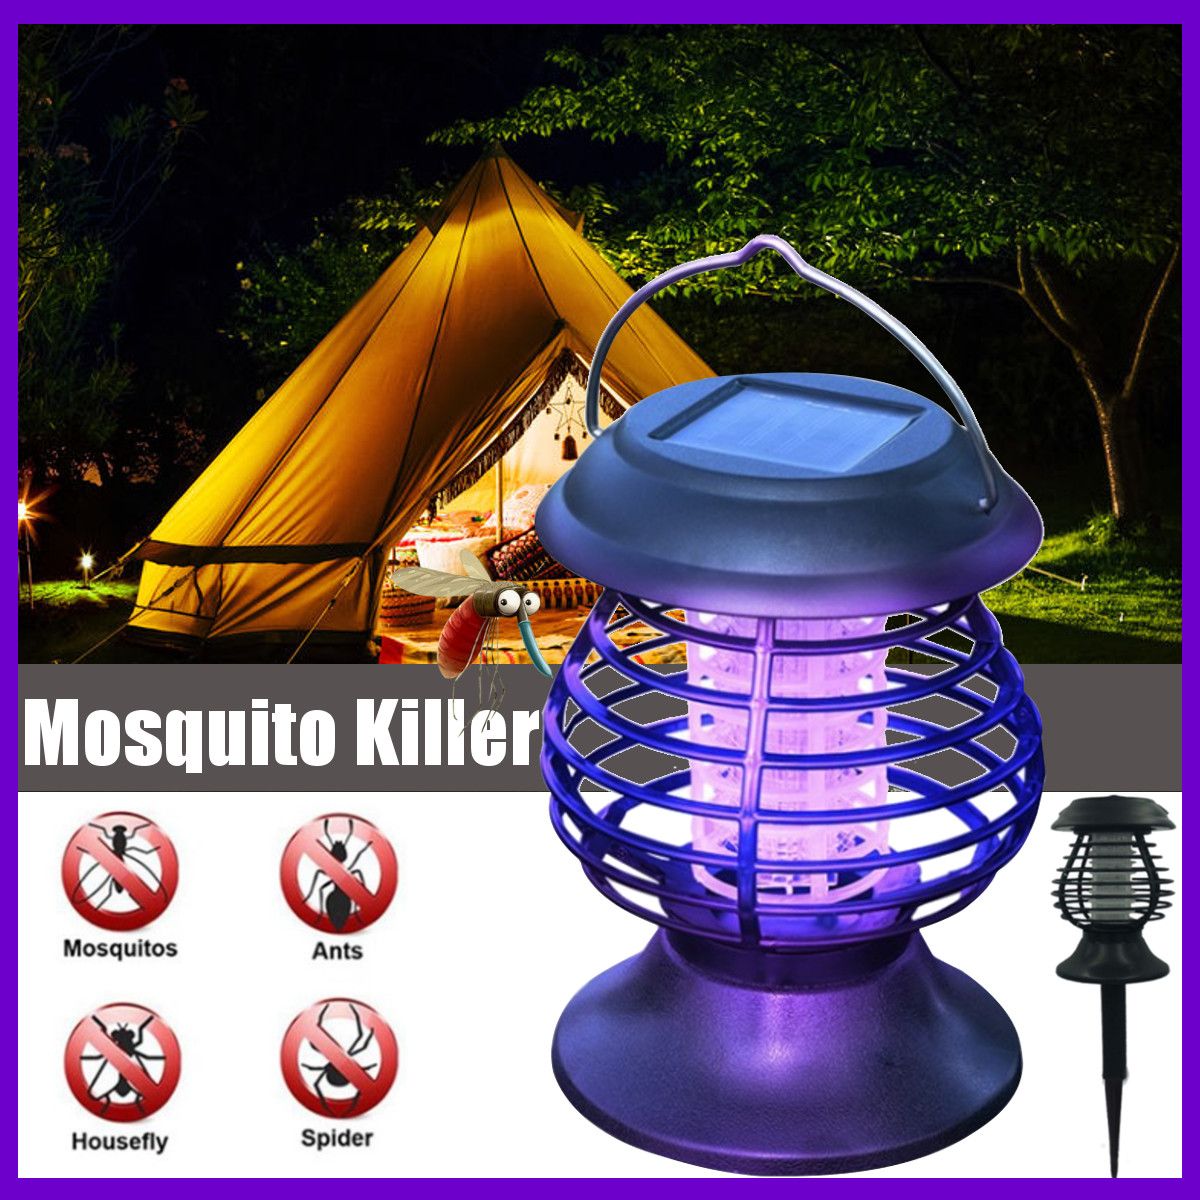 Electric-Fly-Zapper-Mosquito-Insect-Killer-UV-LED-Purple-Tube-Light-Trap-Pest-Solar-IP65-Working-8-H-1693978